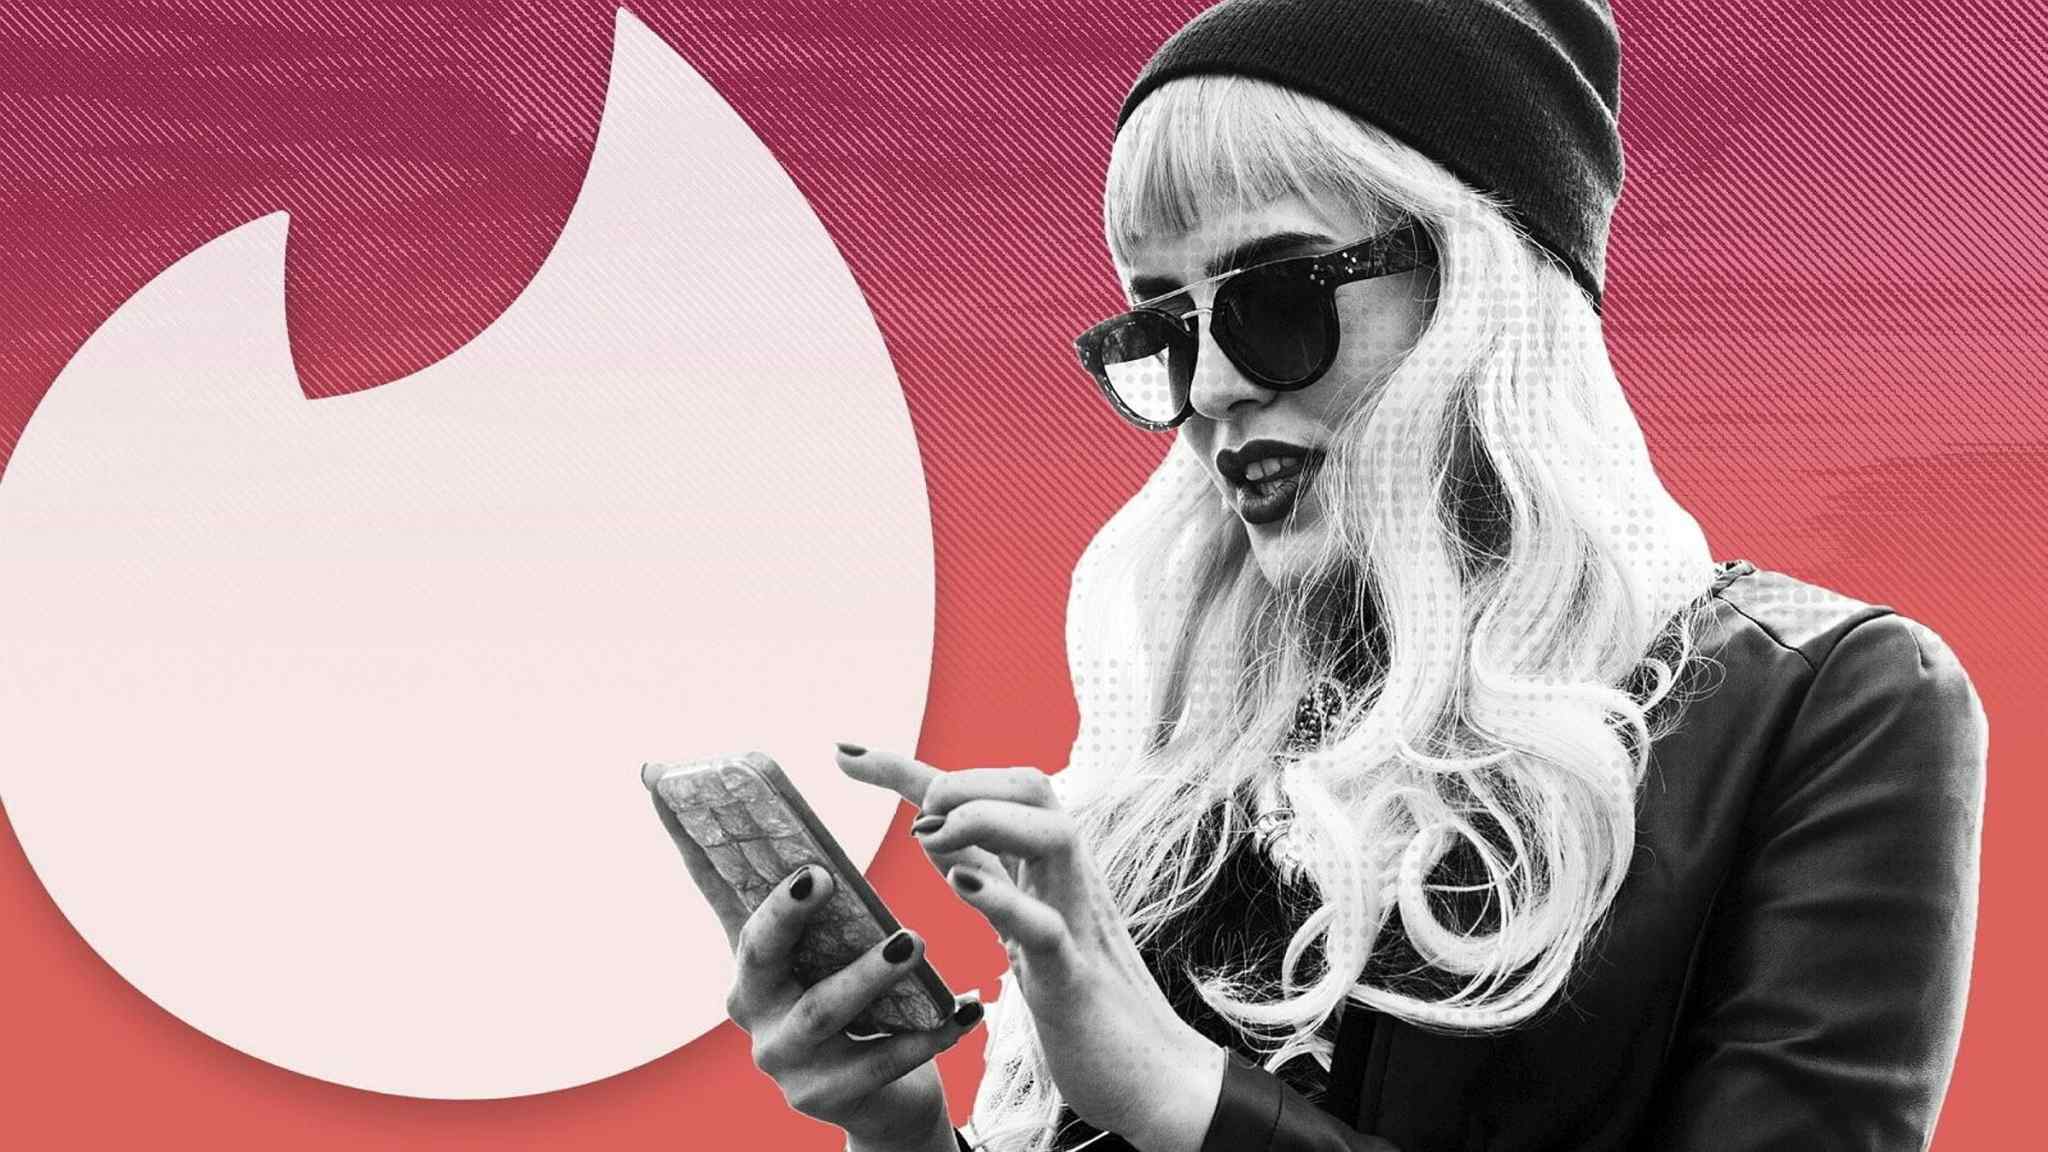 Tinder struggles to attract younger users as Gen Z singles look to new apps 